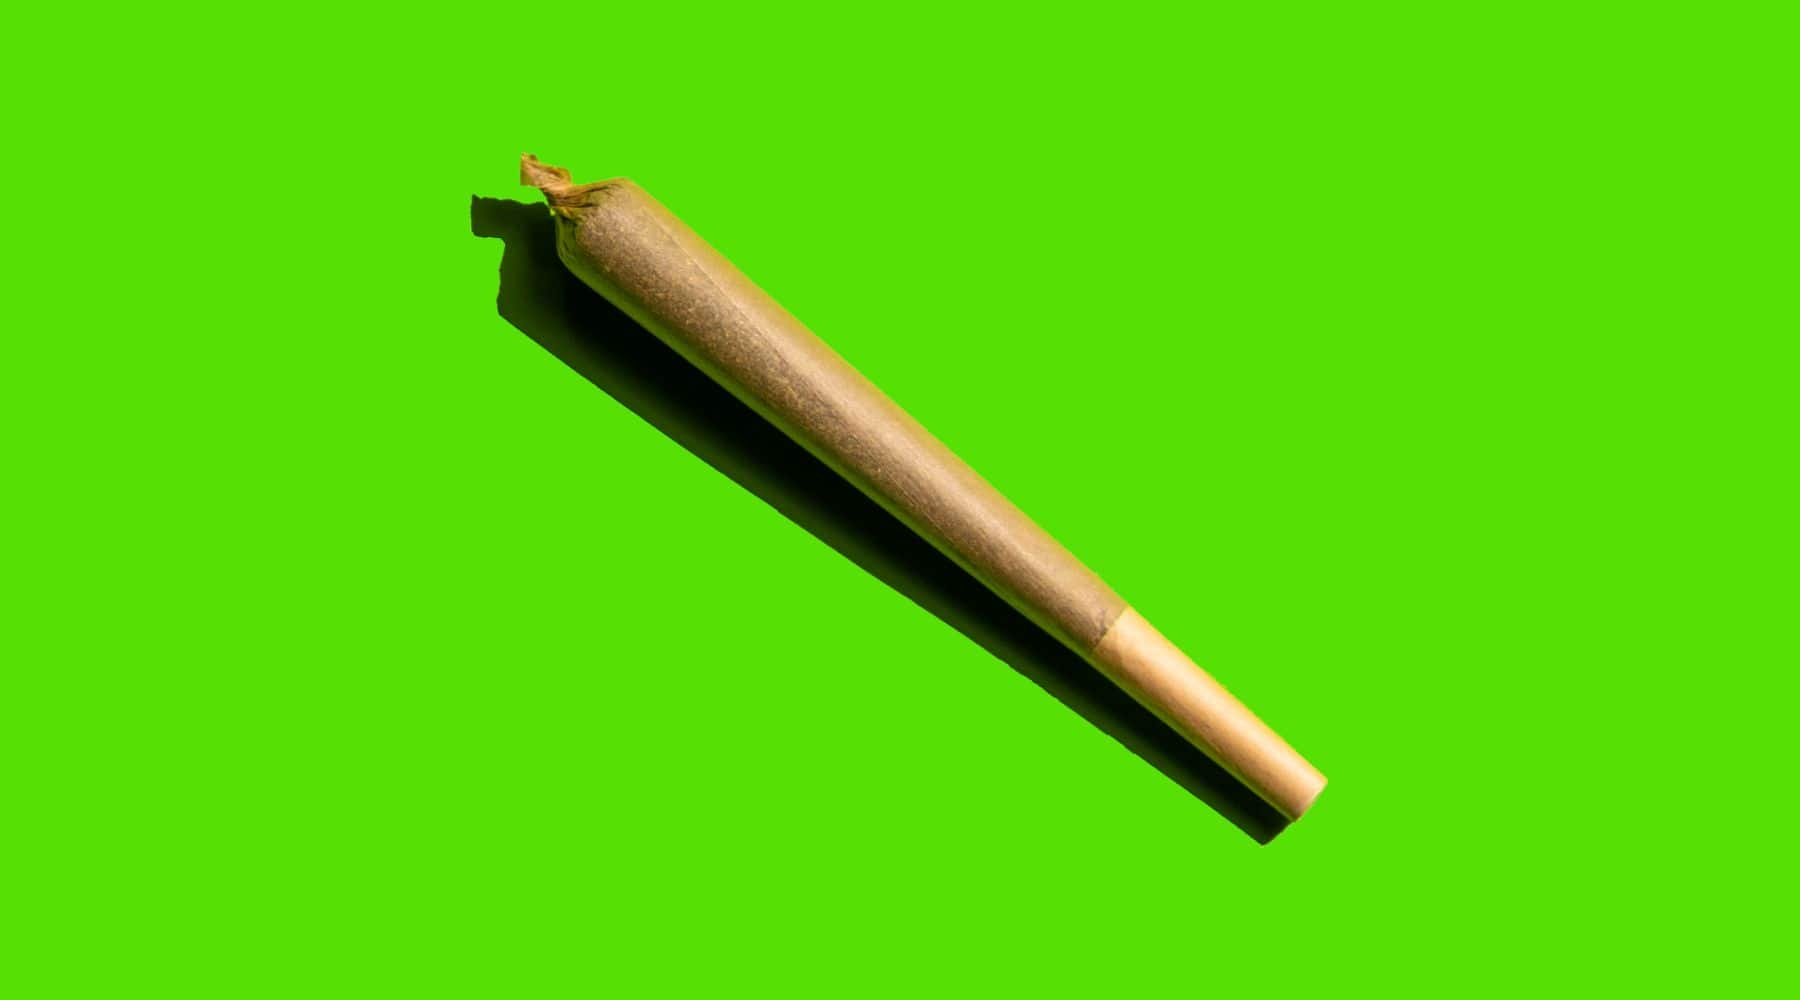 a THC joint on a green background